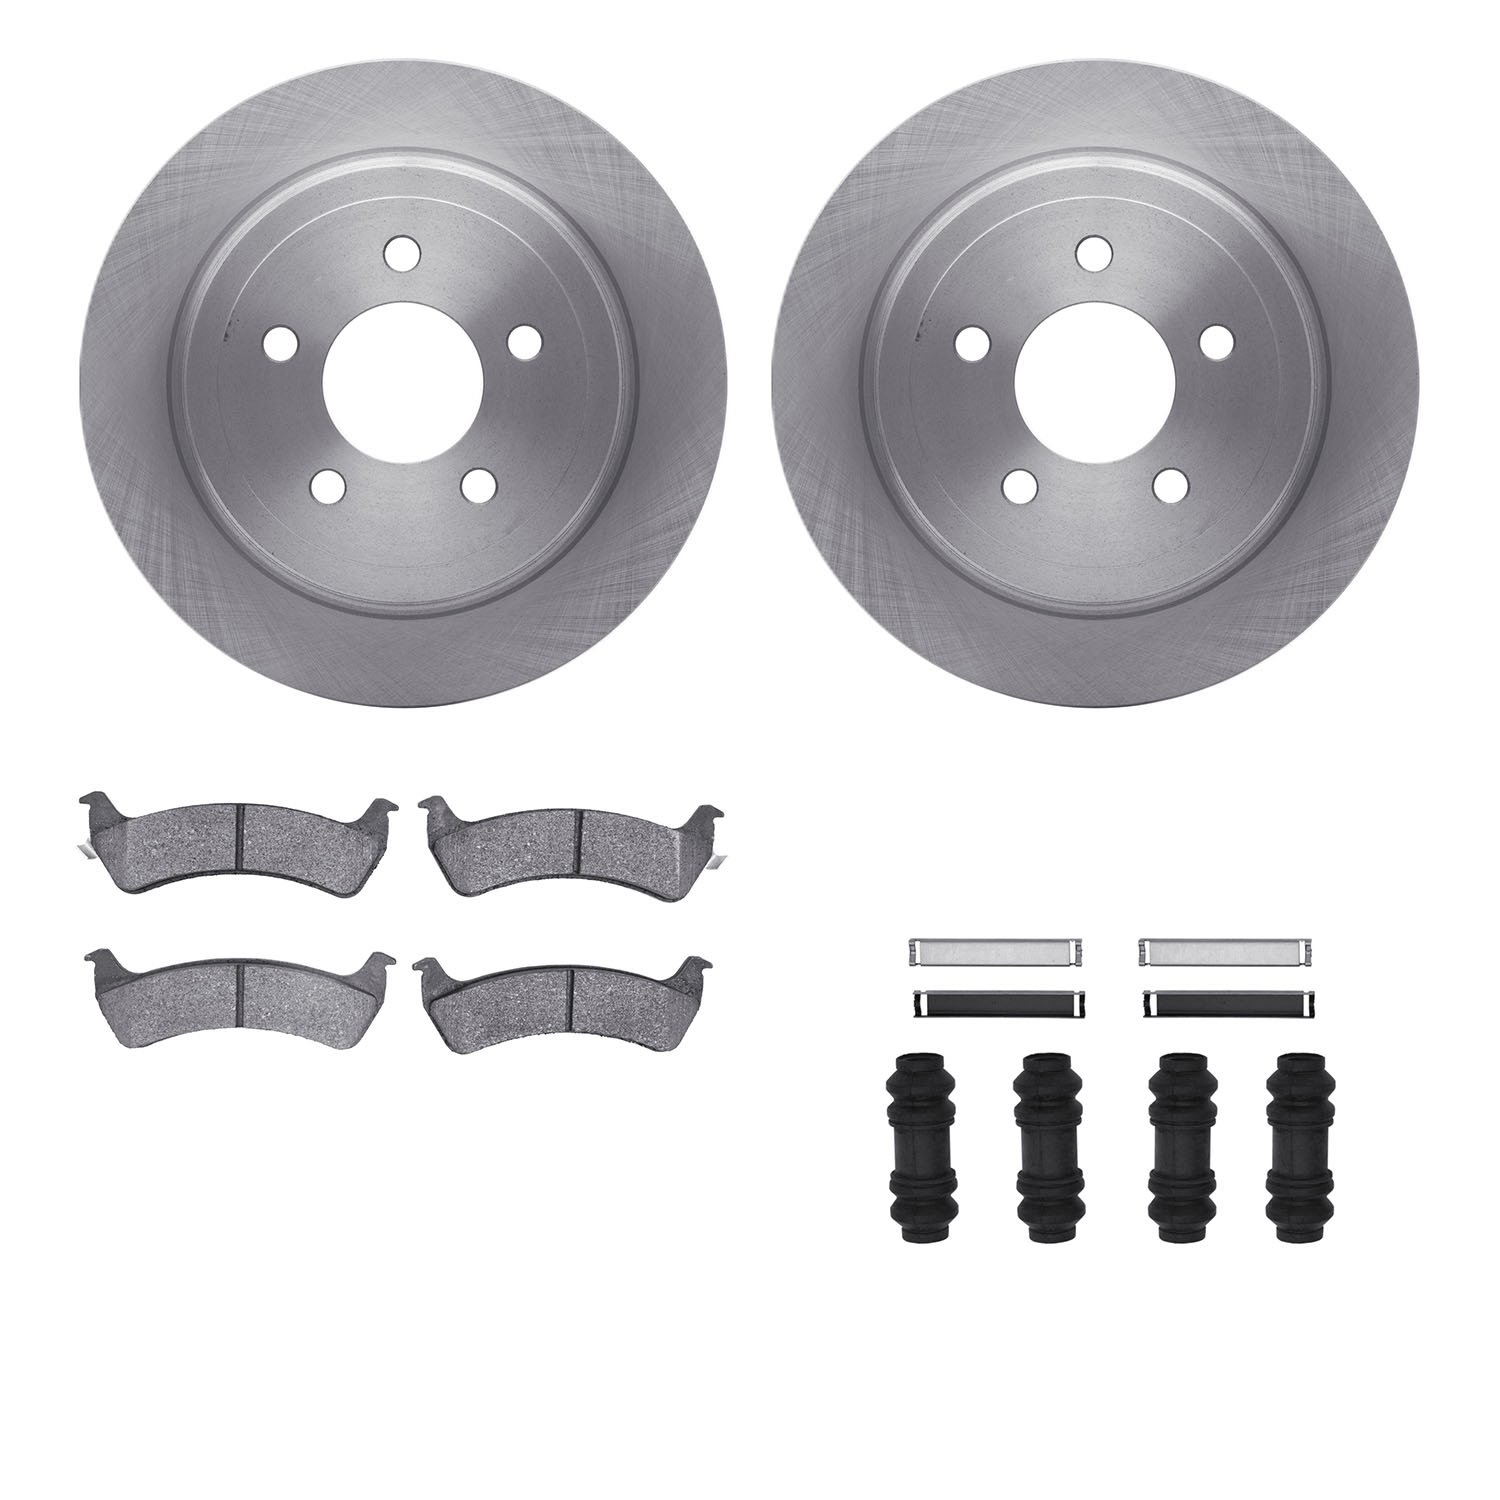 6412-54206 Brake Rotors with Ultimate-Duty Brake Pads Kit & Hardware, 2003-2005 Ford/Lincoln/Mercury/Mazda, Position: Rear